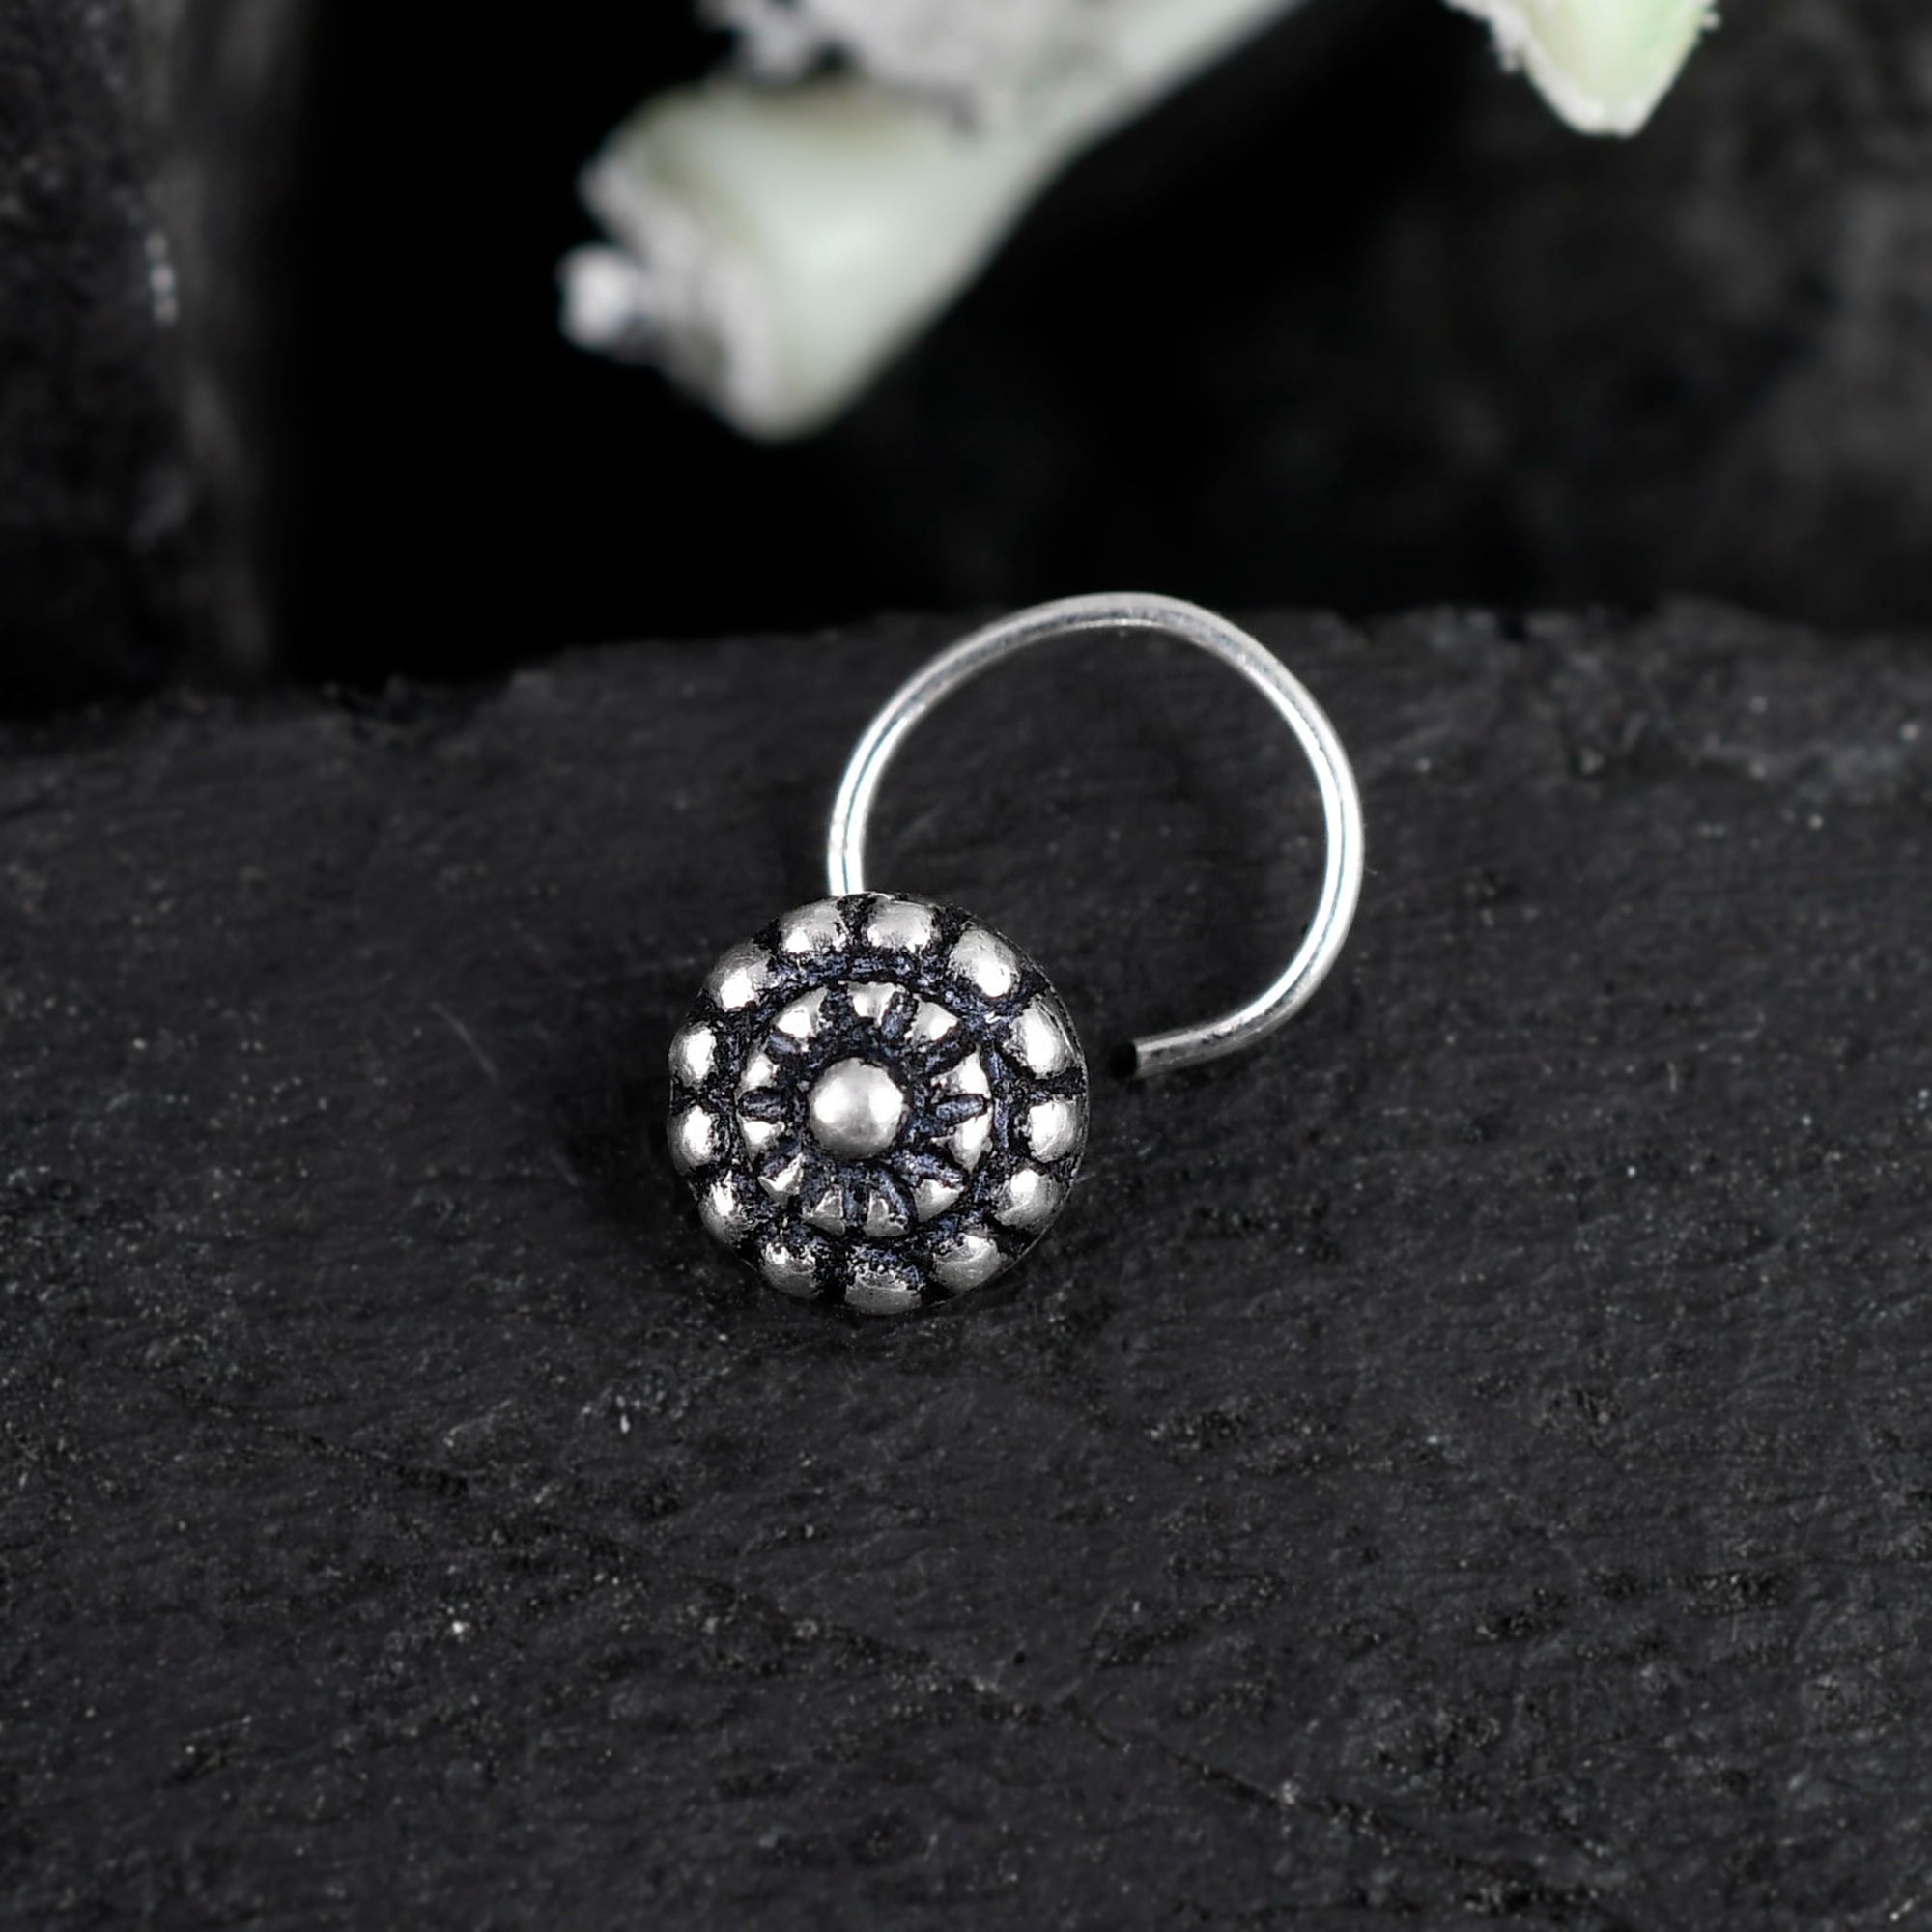 Buy 92.5 Sterling Silver Nose Ring With Zirconia KALKI Fashion India